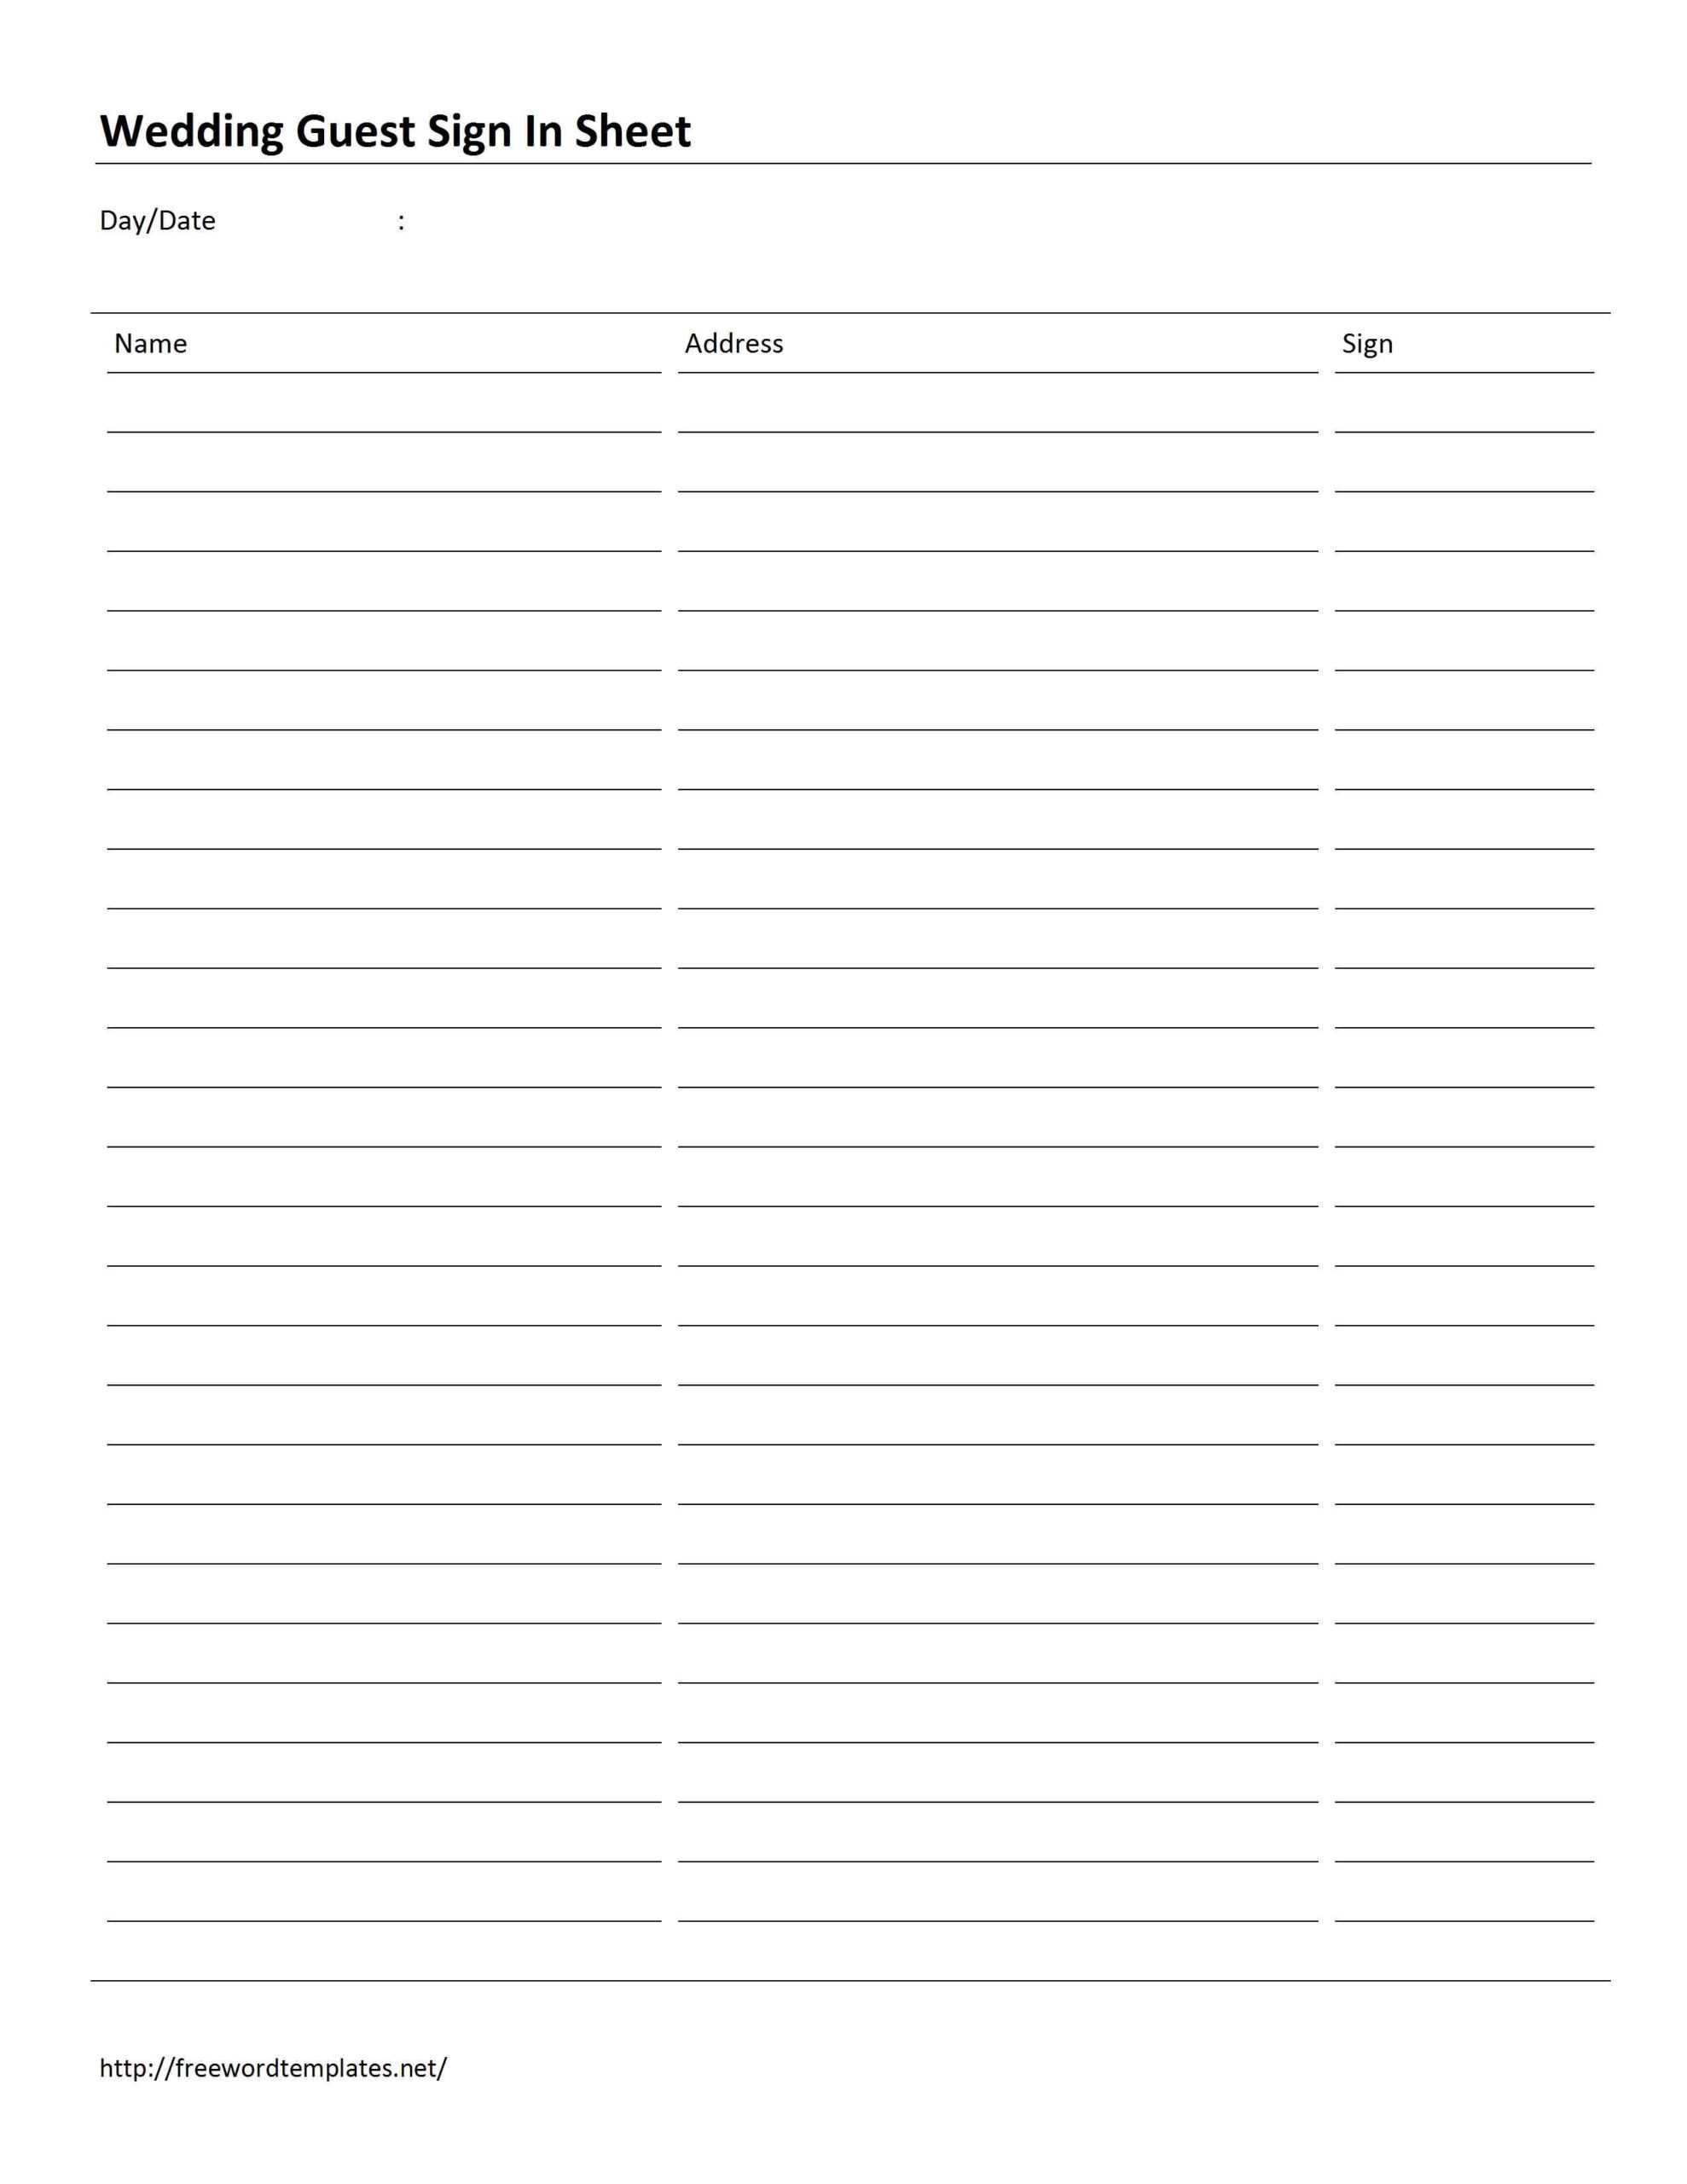 Guest Sign In Sheet Template Microsoft Word | Customer Throughout 3 Column Word Template